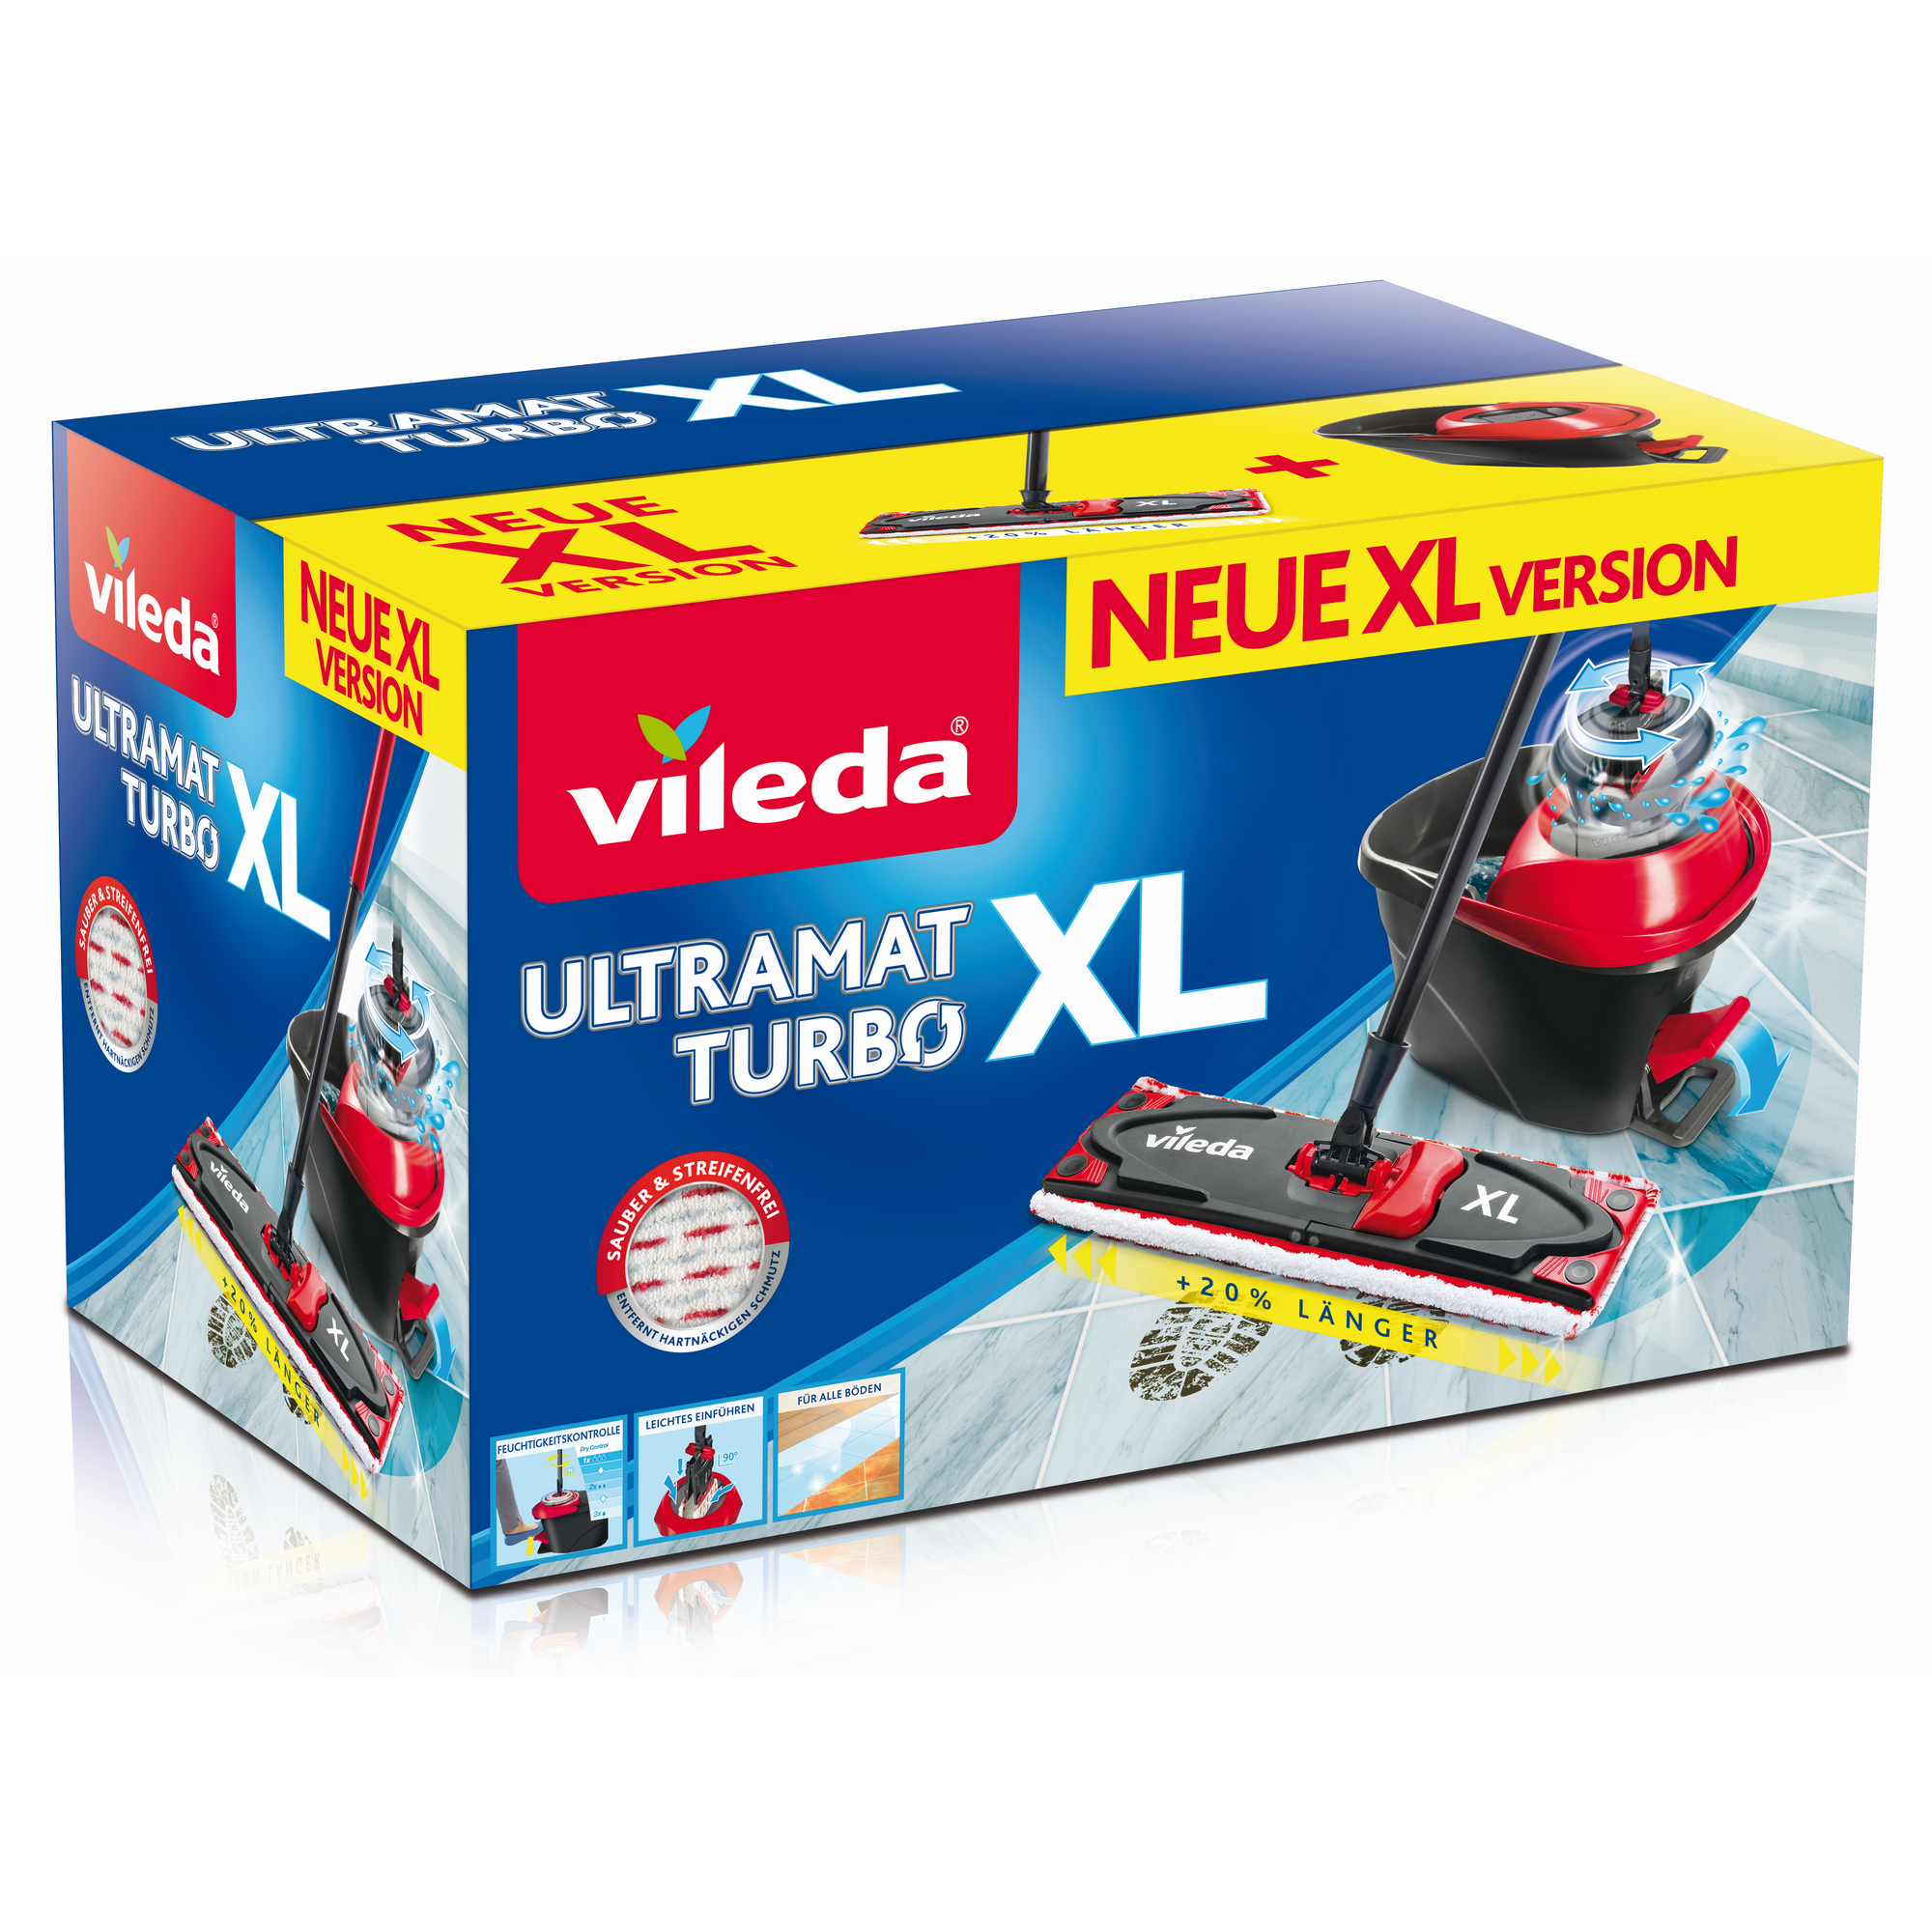 Bodenwischer-Set 'UltraMat XL Turbo' Microfaser 2in1 + product picture